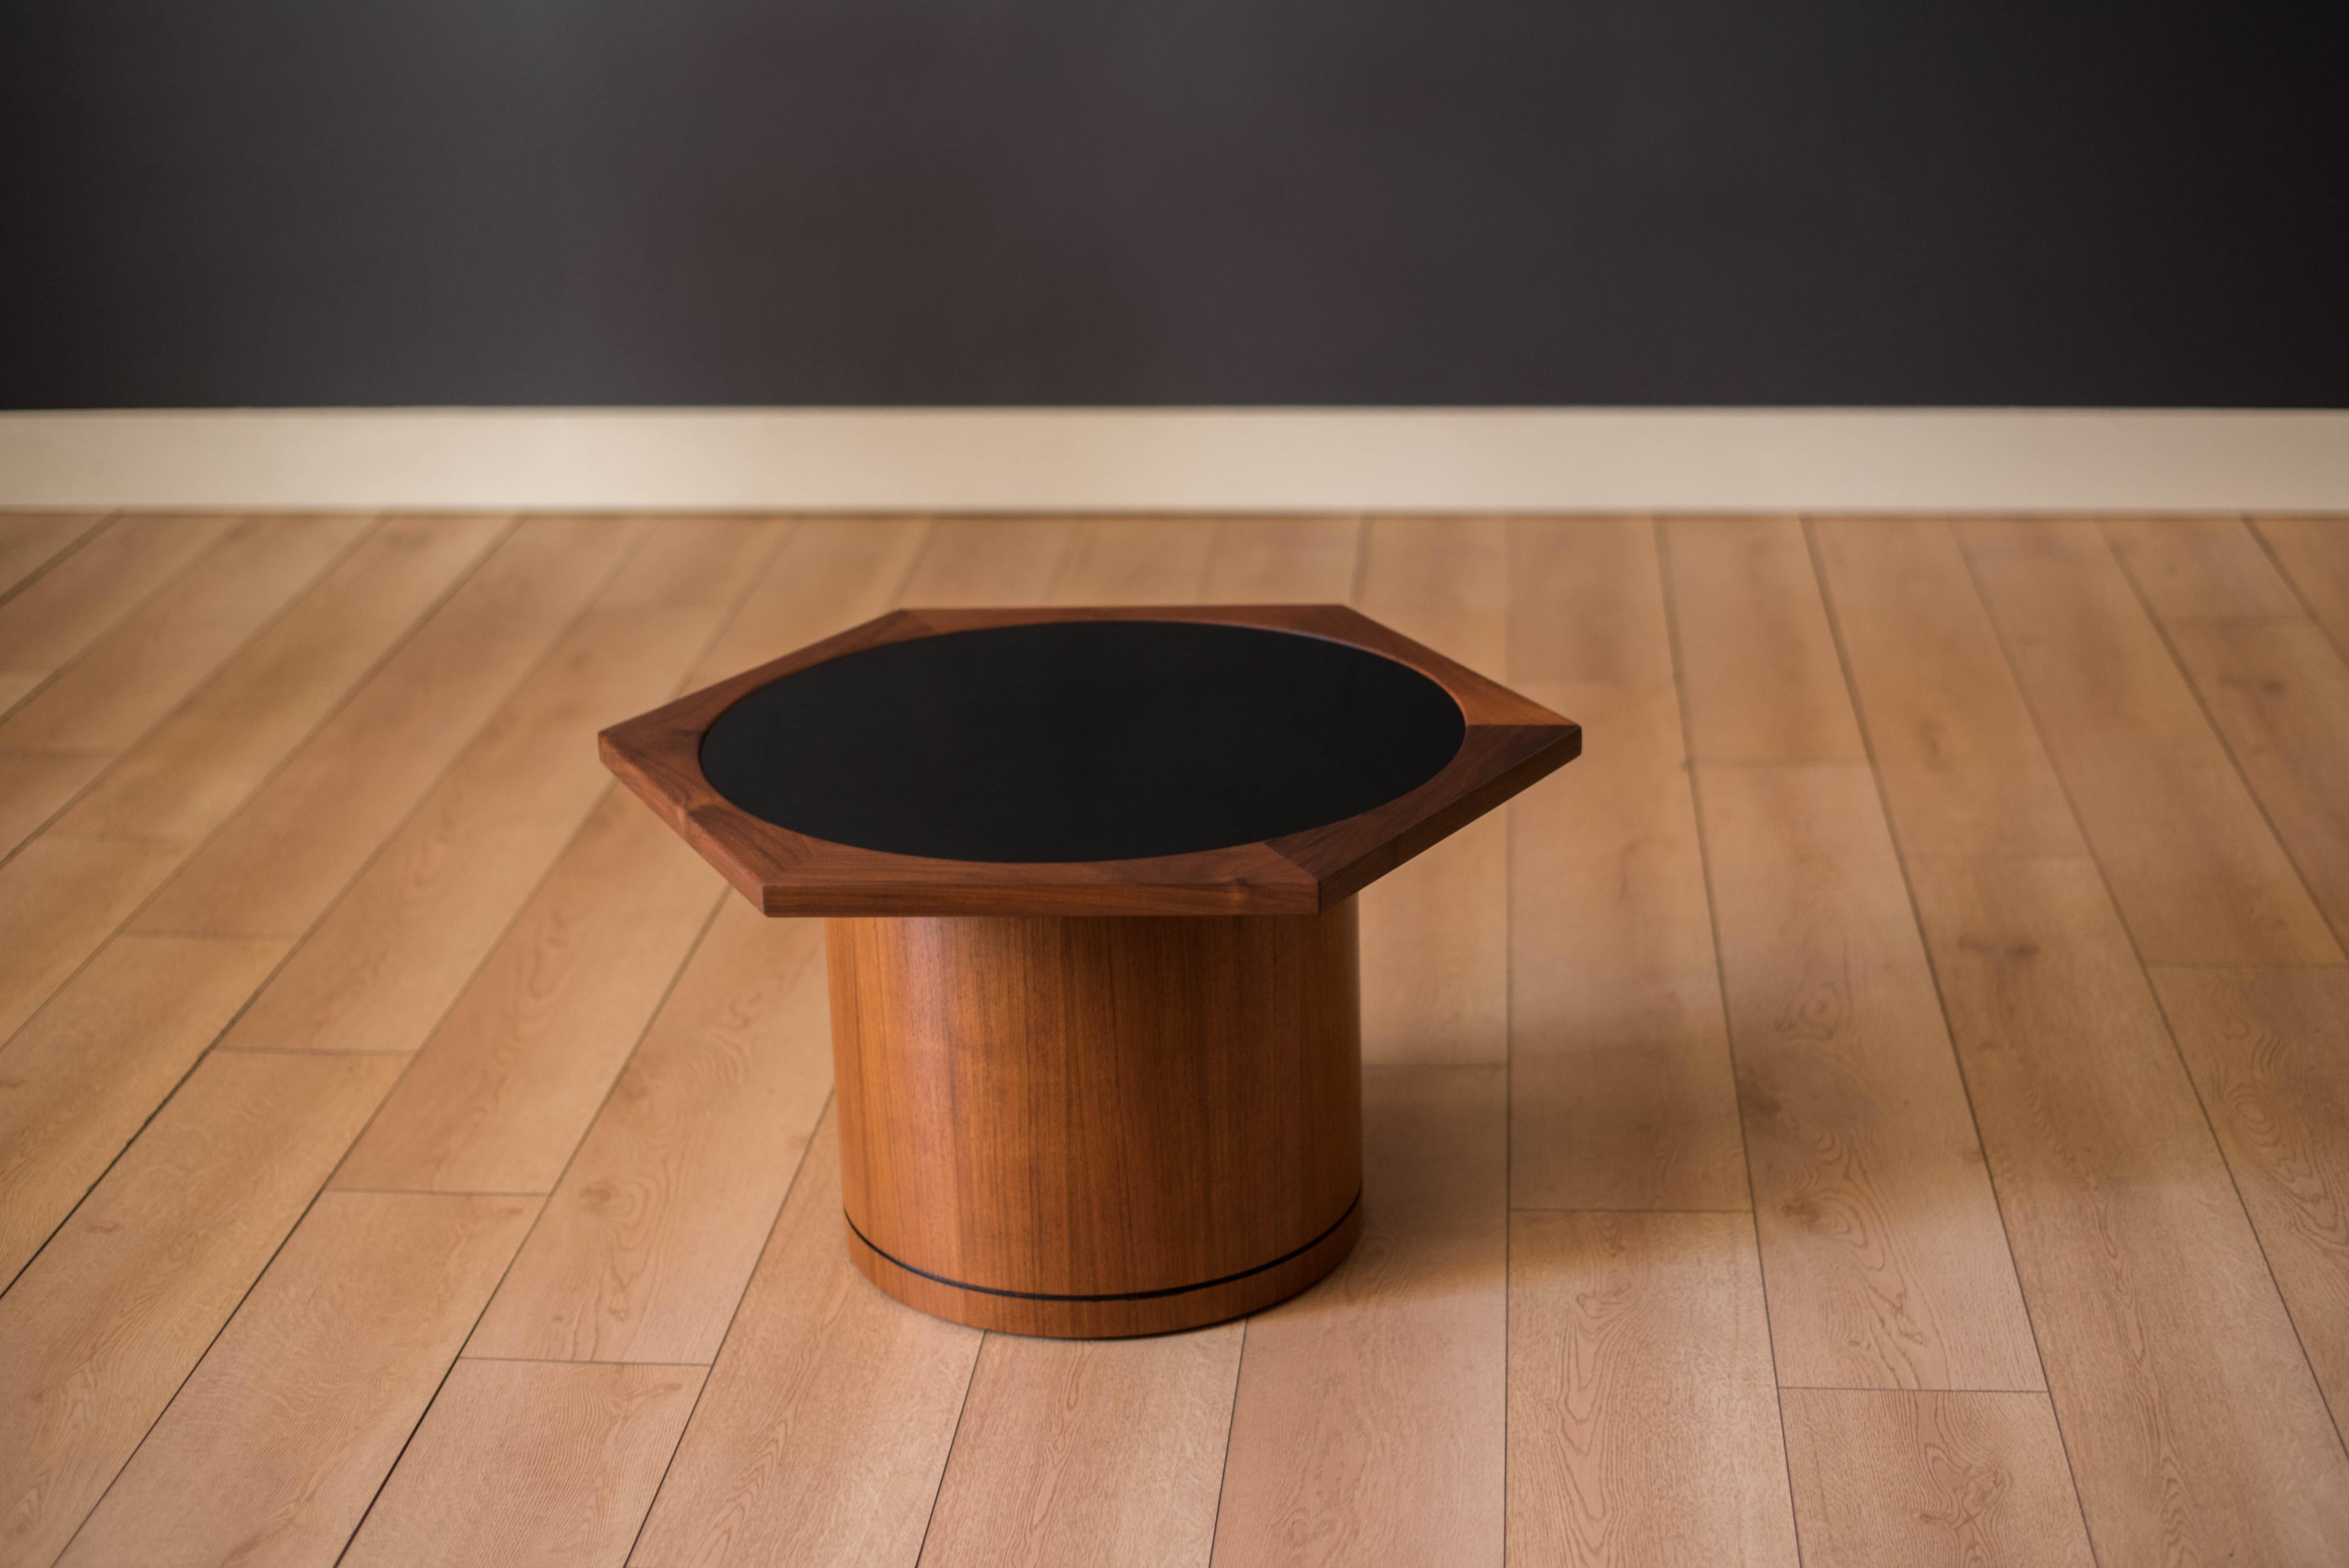 Mid-Century Modern occasional accent end table manufactured by Brown Saltman c. 1960's. This piece features a unique walnut hexagon design with a round black laminate top. Easy to maintain surface is ideal for resting drinks on.




Offered by Mid